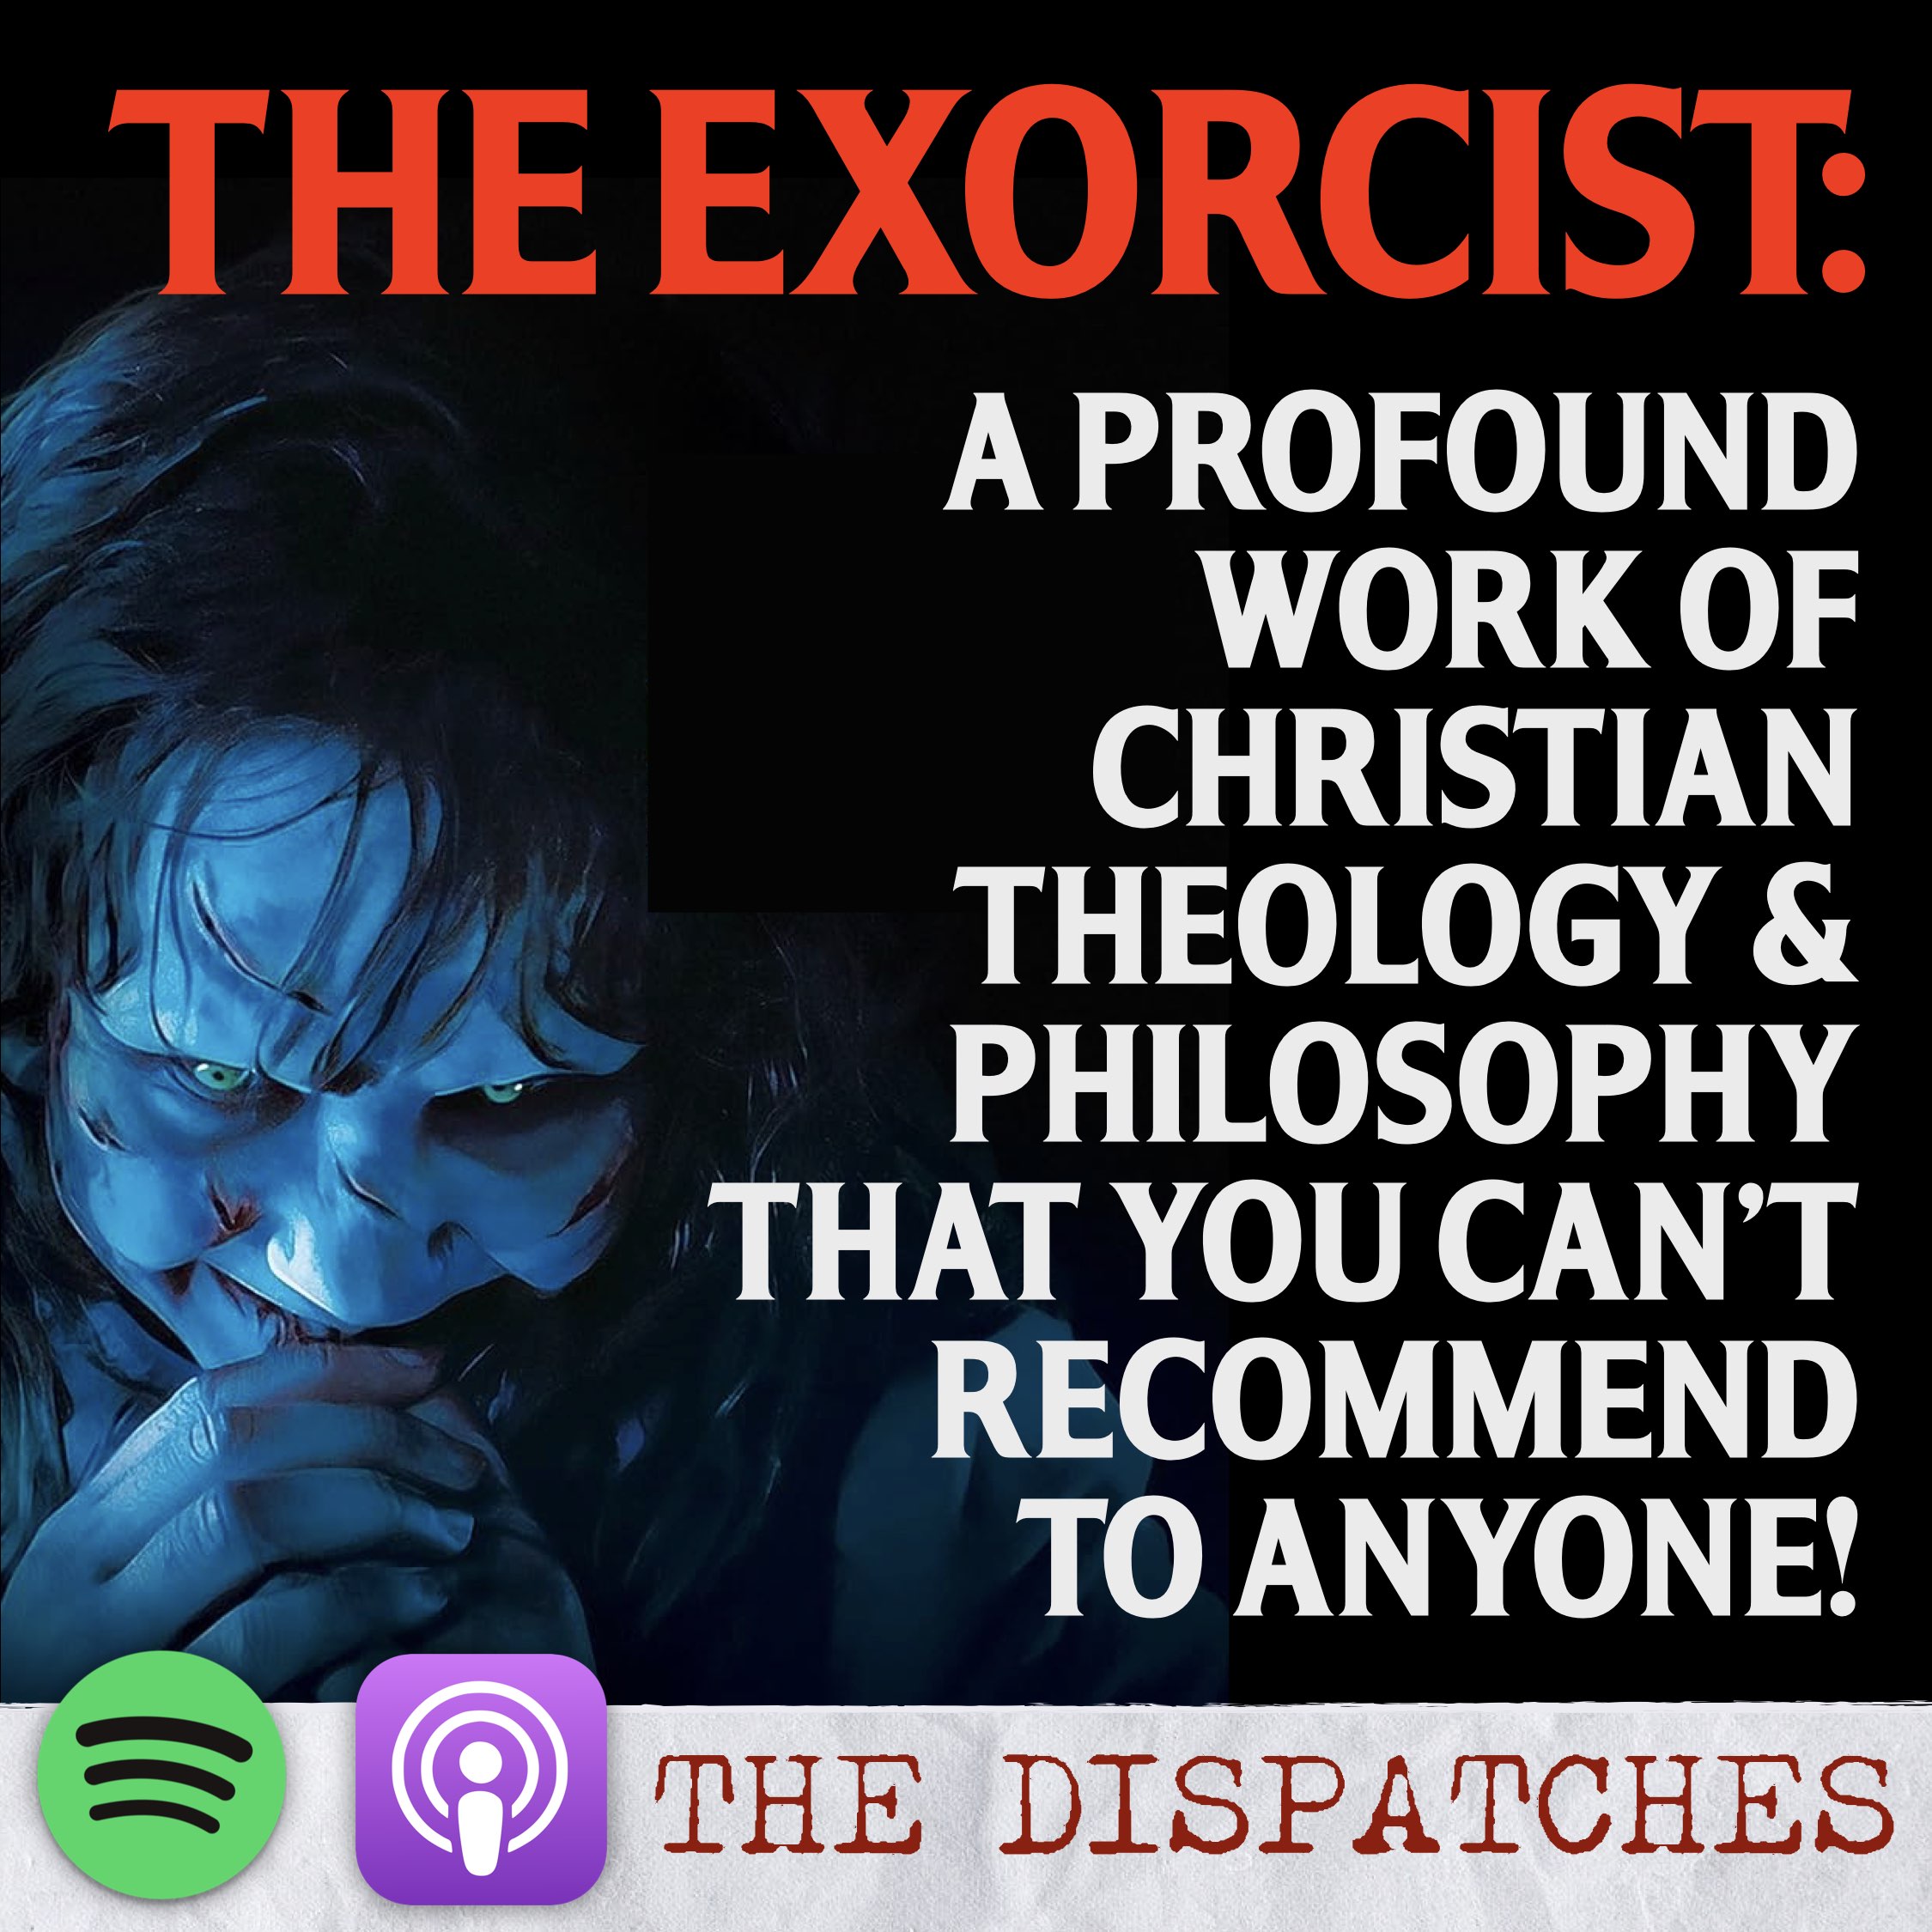 The Exorcist: A Profound Work of Christian Theology and Philosophy That You Can’t Recommend To Anyone!